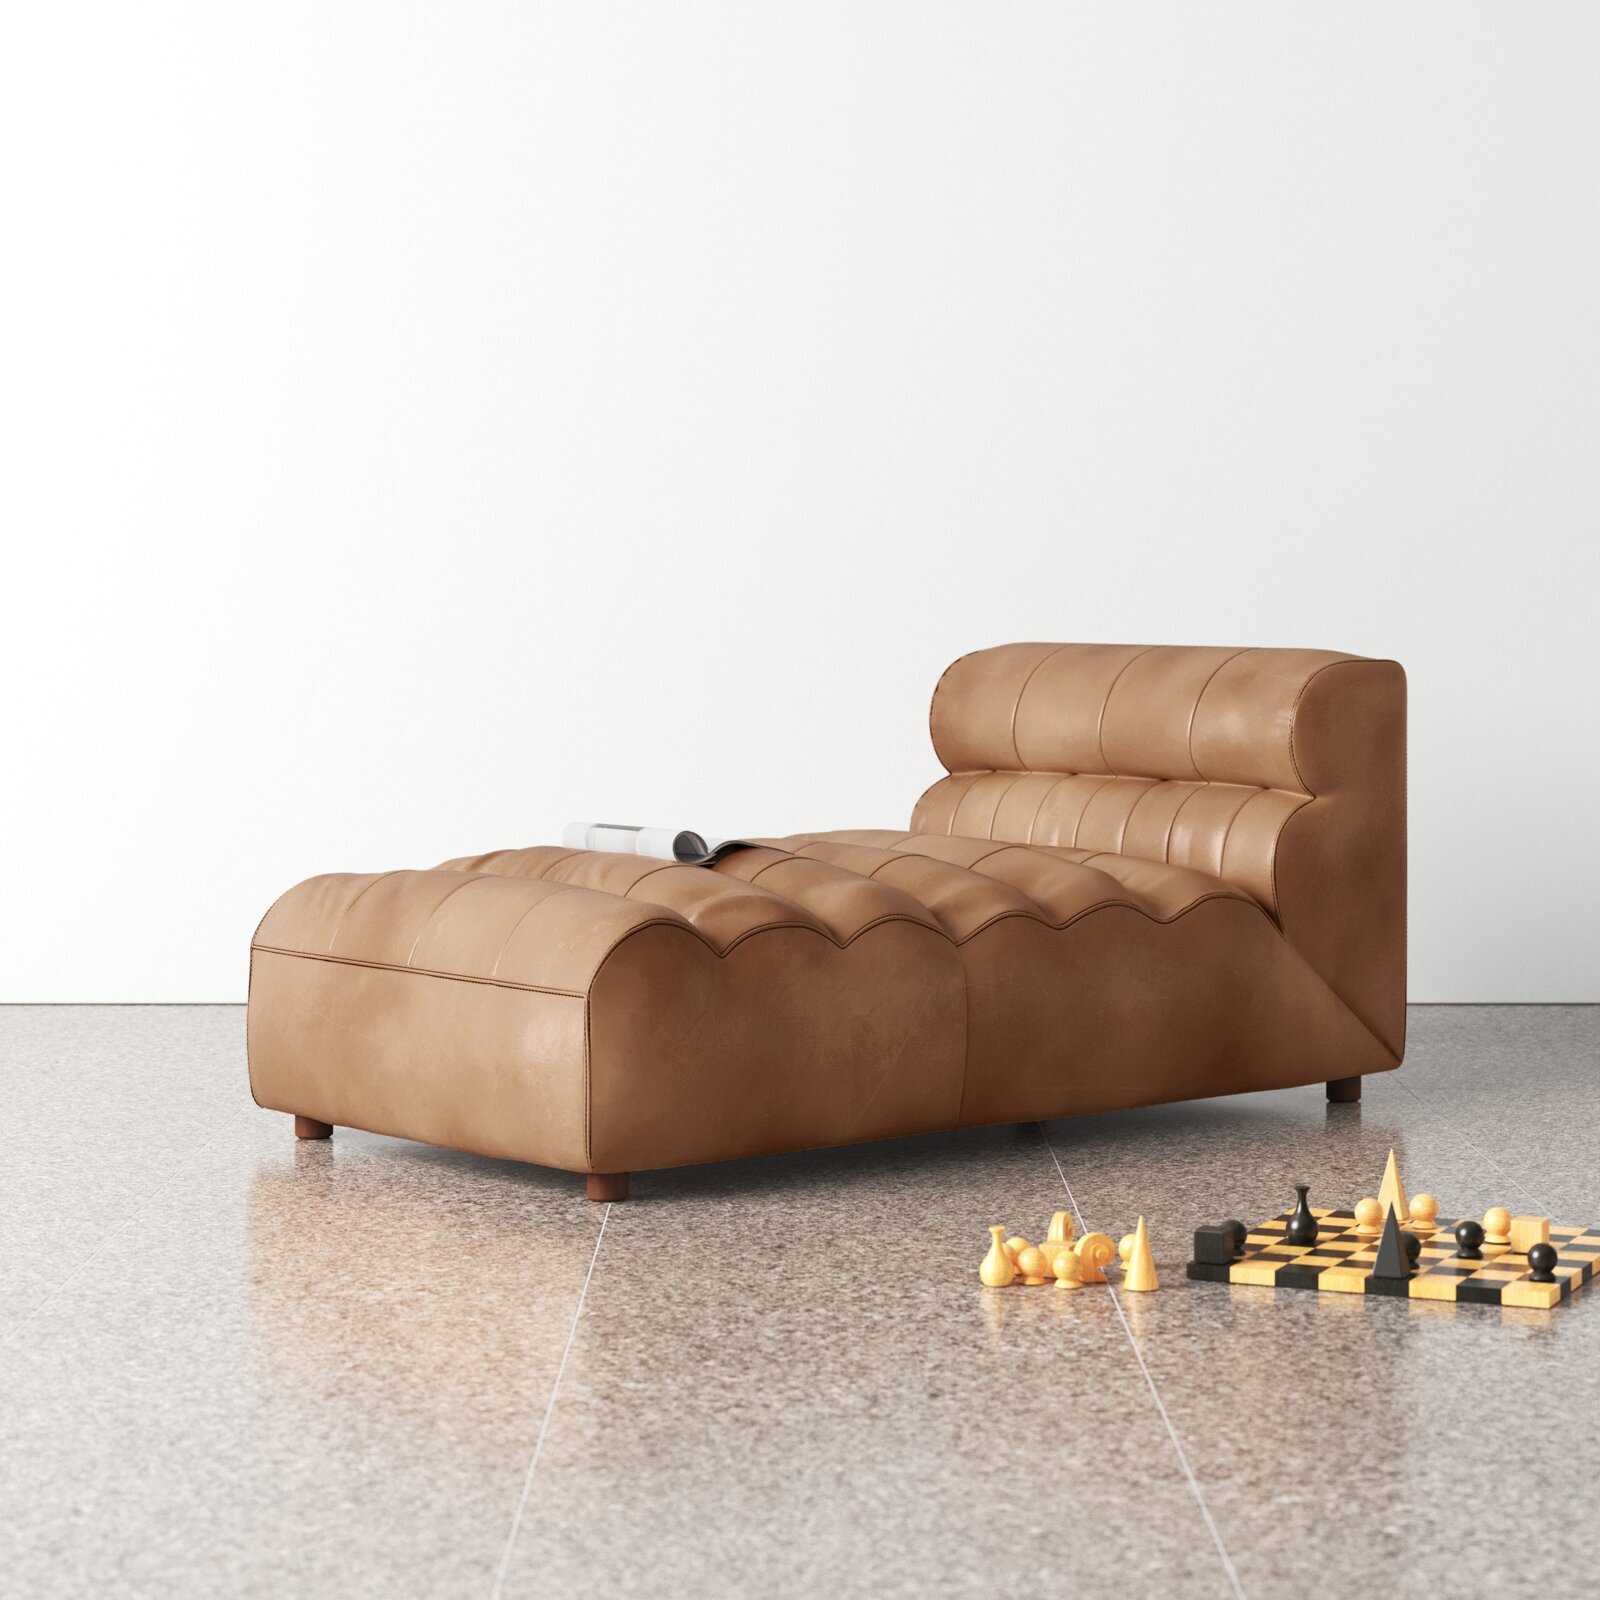 Leather Double Chaise Lounge